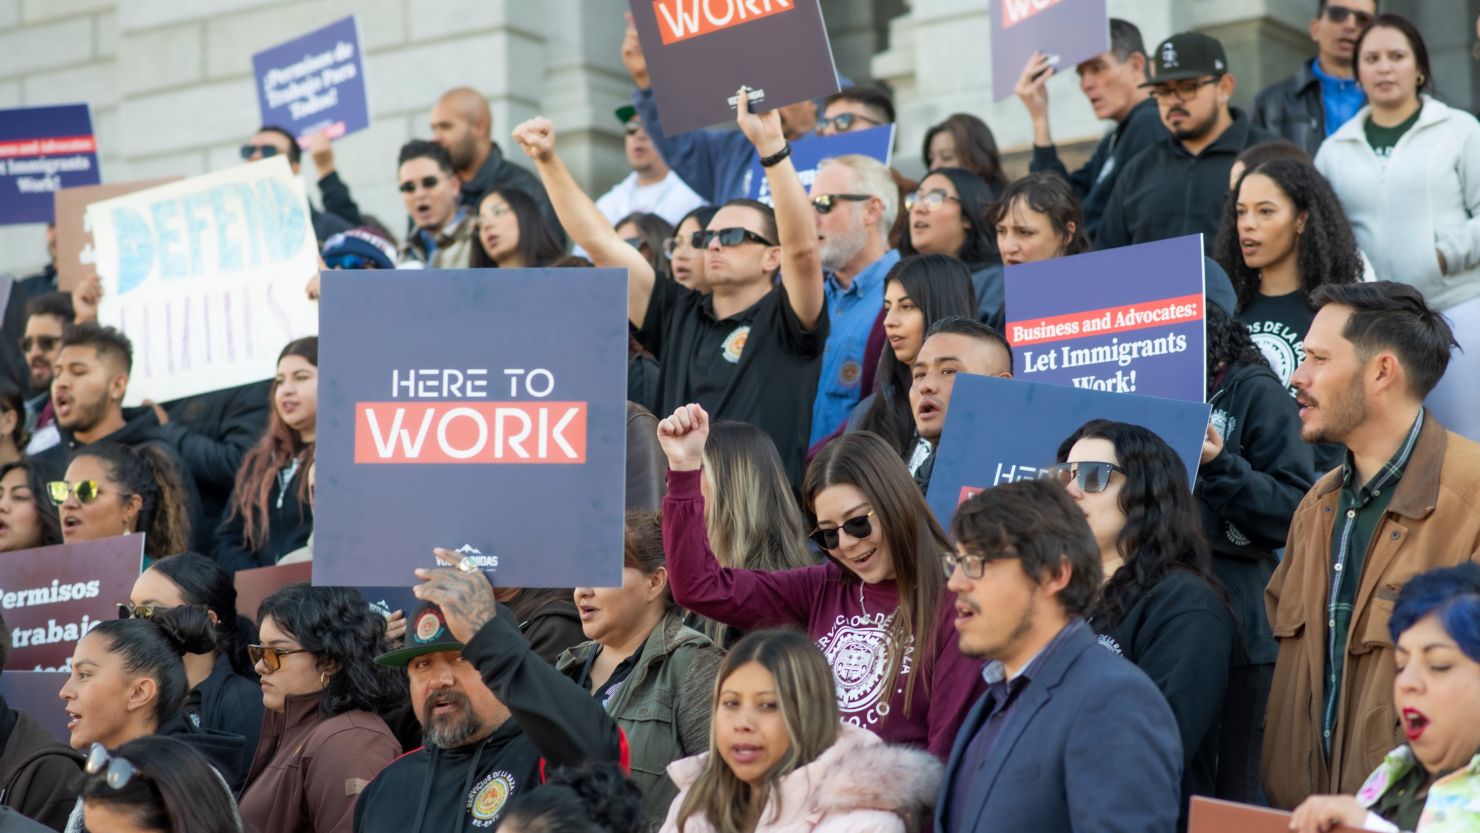 Business leaders, longtime immigrant workers, mixed-status families and others gathered at the Colorado Capitol in Denver last fall to push President Joe Biden to expand work permits to more undocumented immigrants who have lived in the US for years.